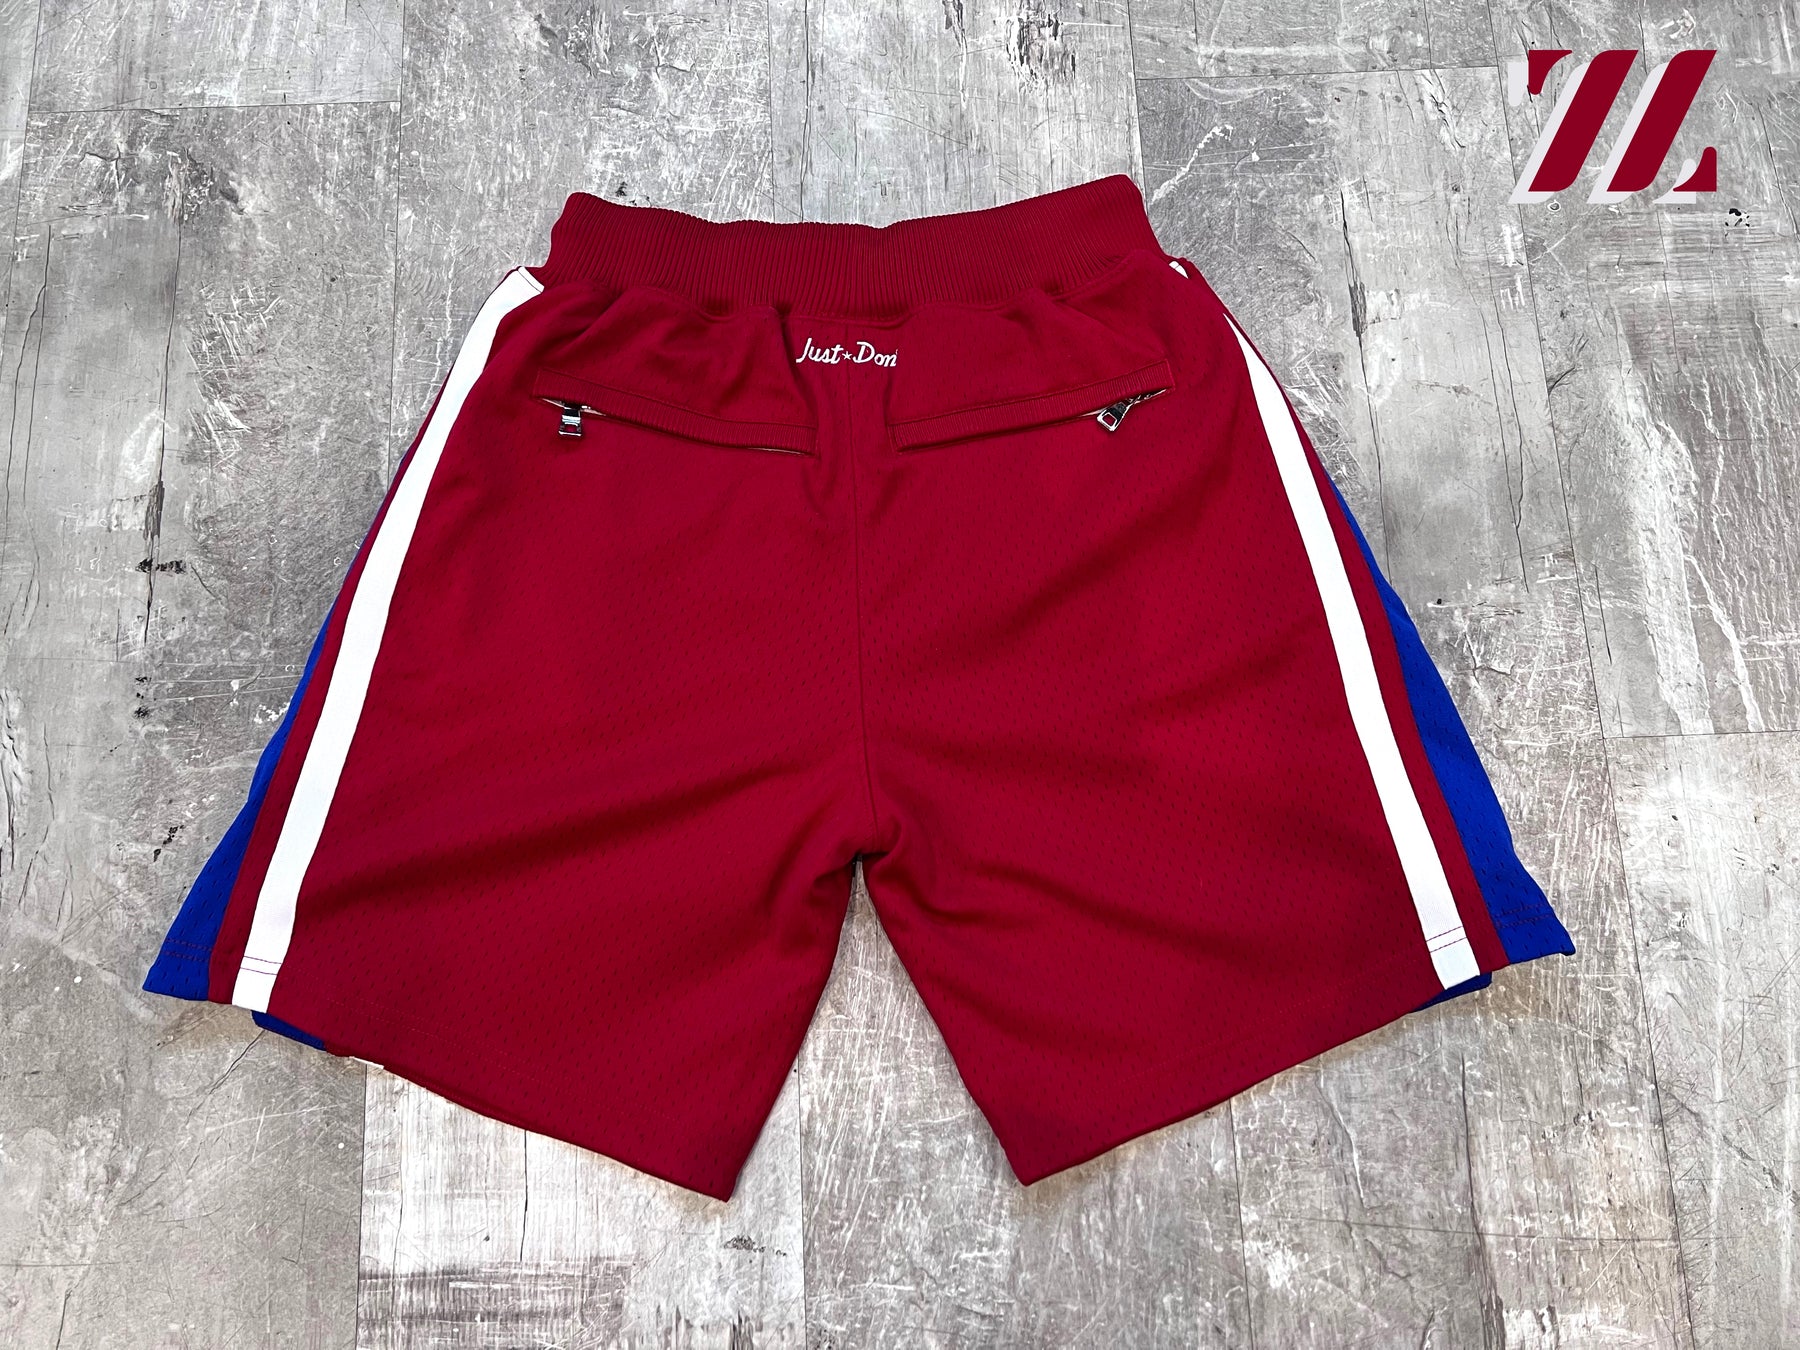 Dior Basketball Jersey/Shorts XL - sorry_not_fame Mall